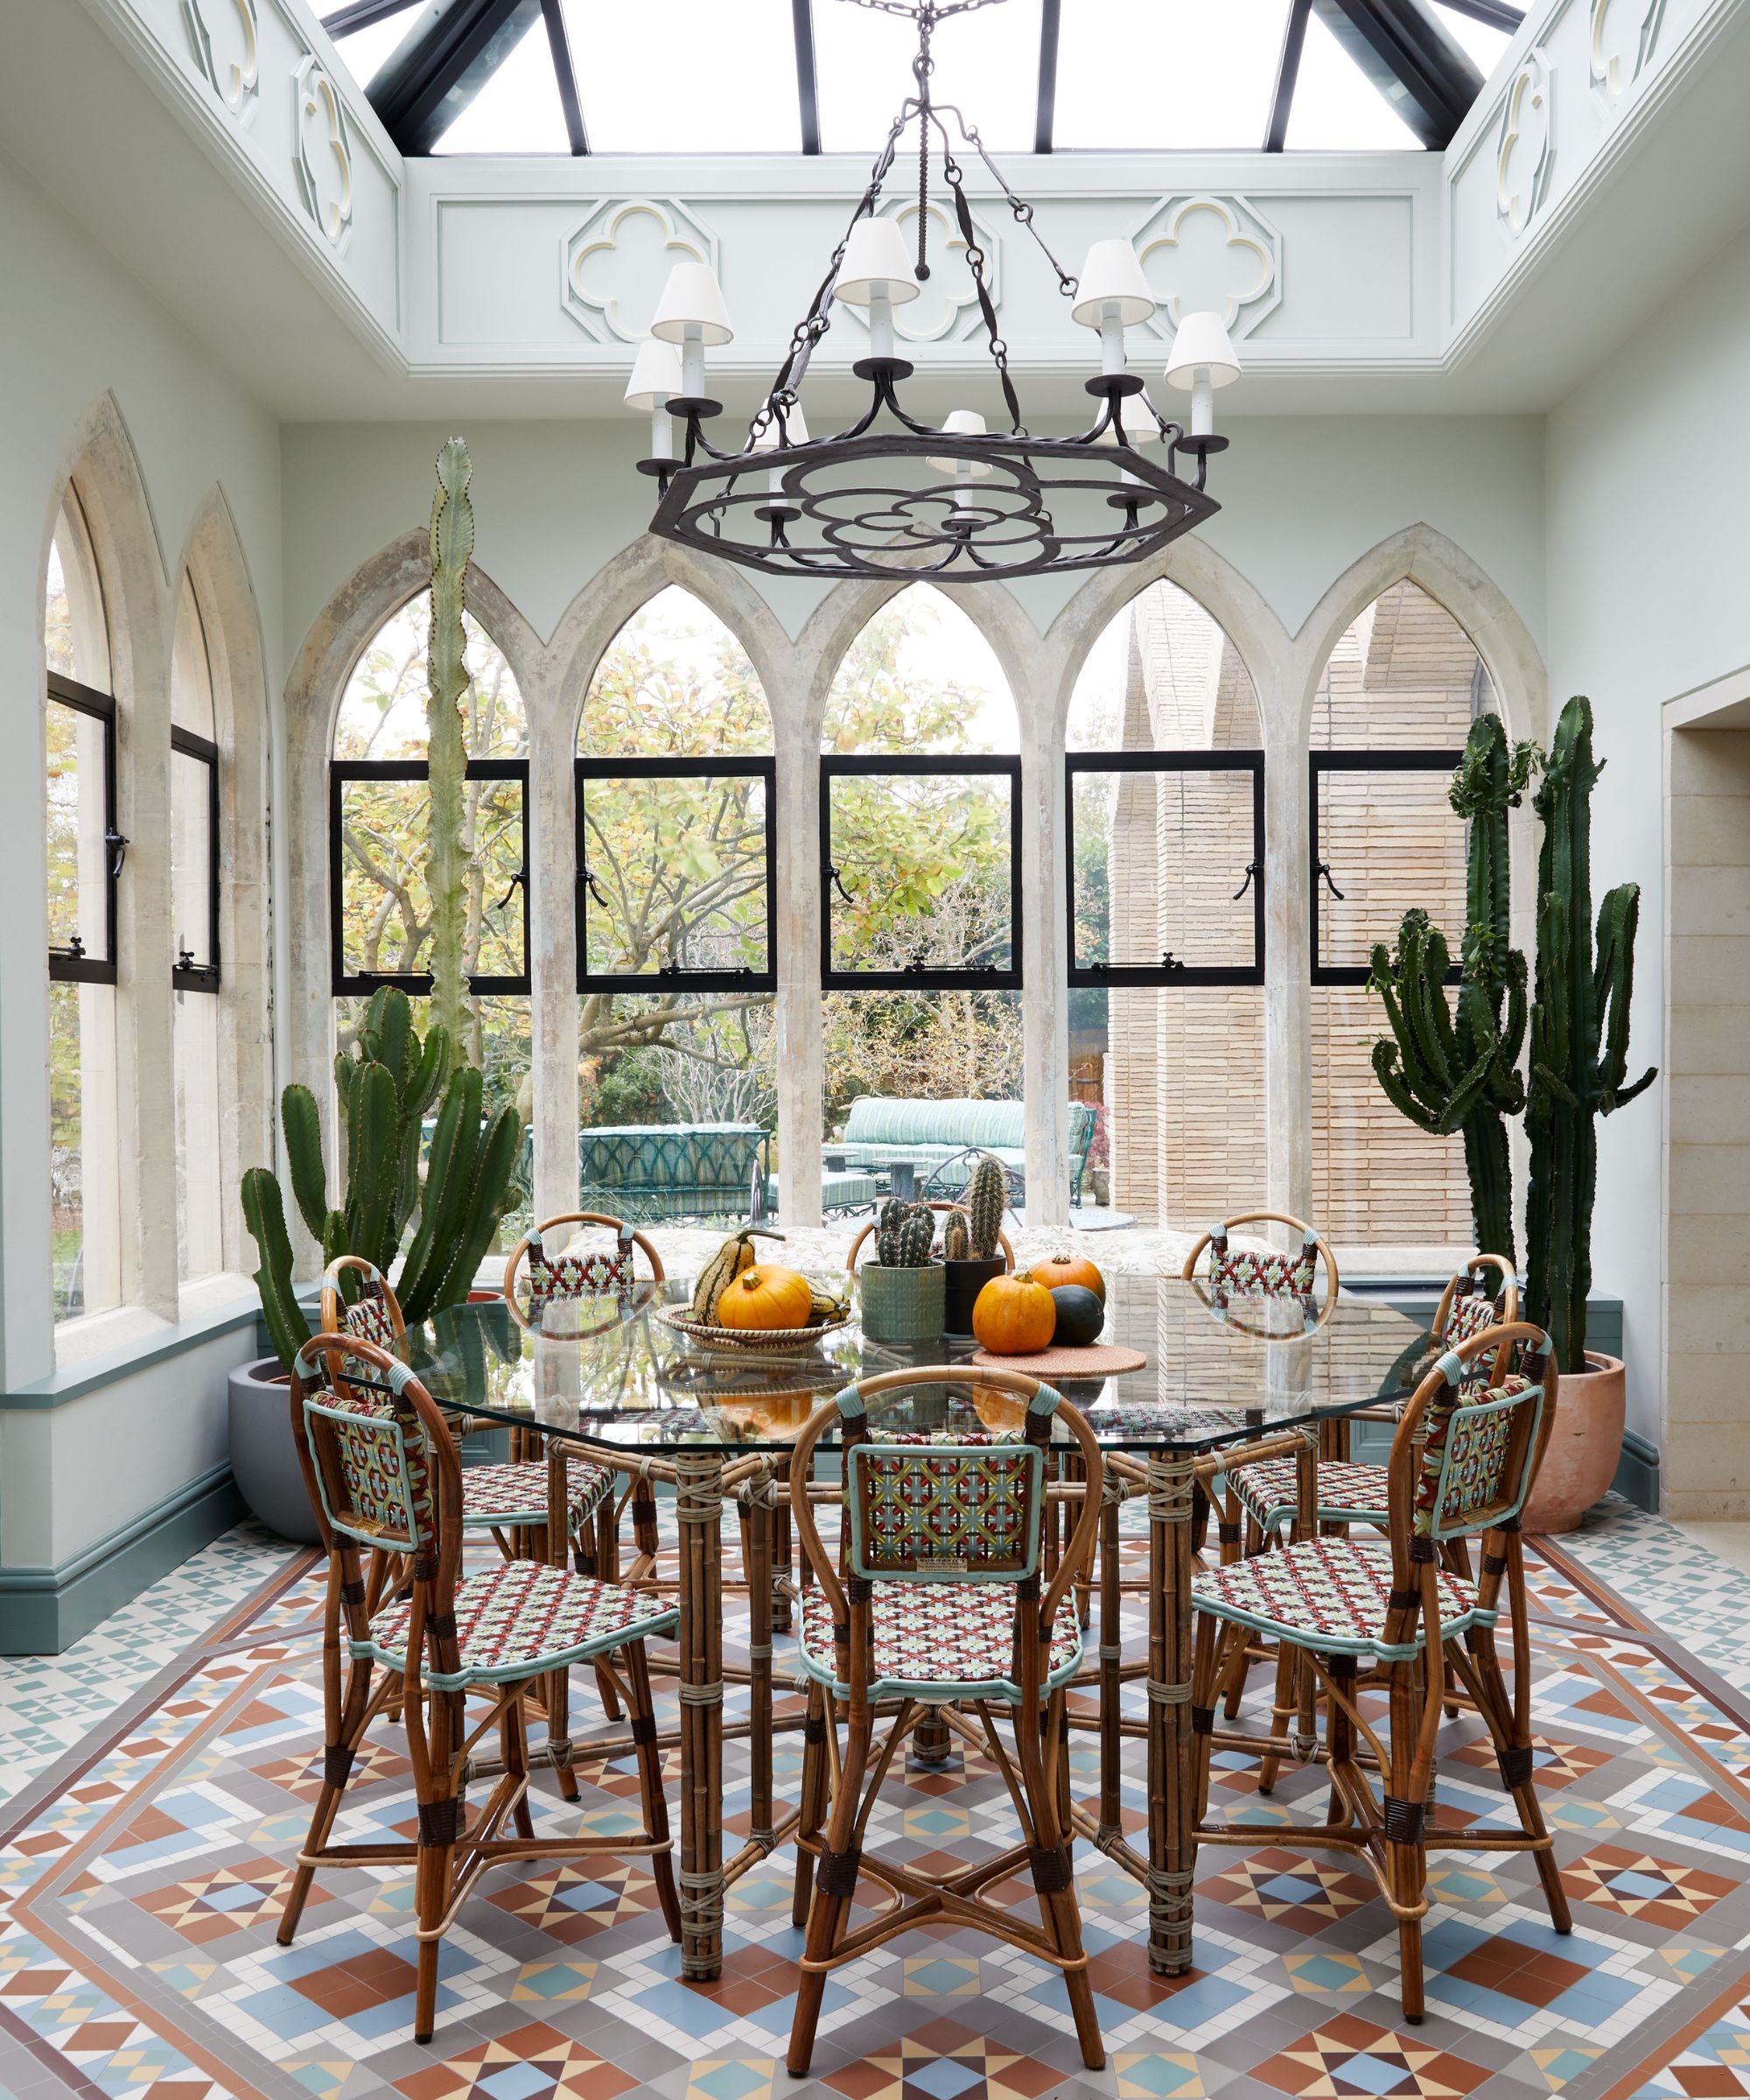 Gothichome with a dining room blending old and new